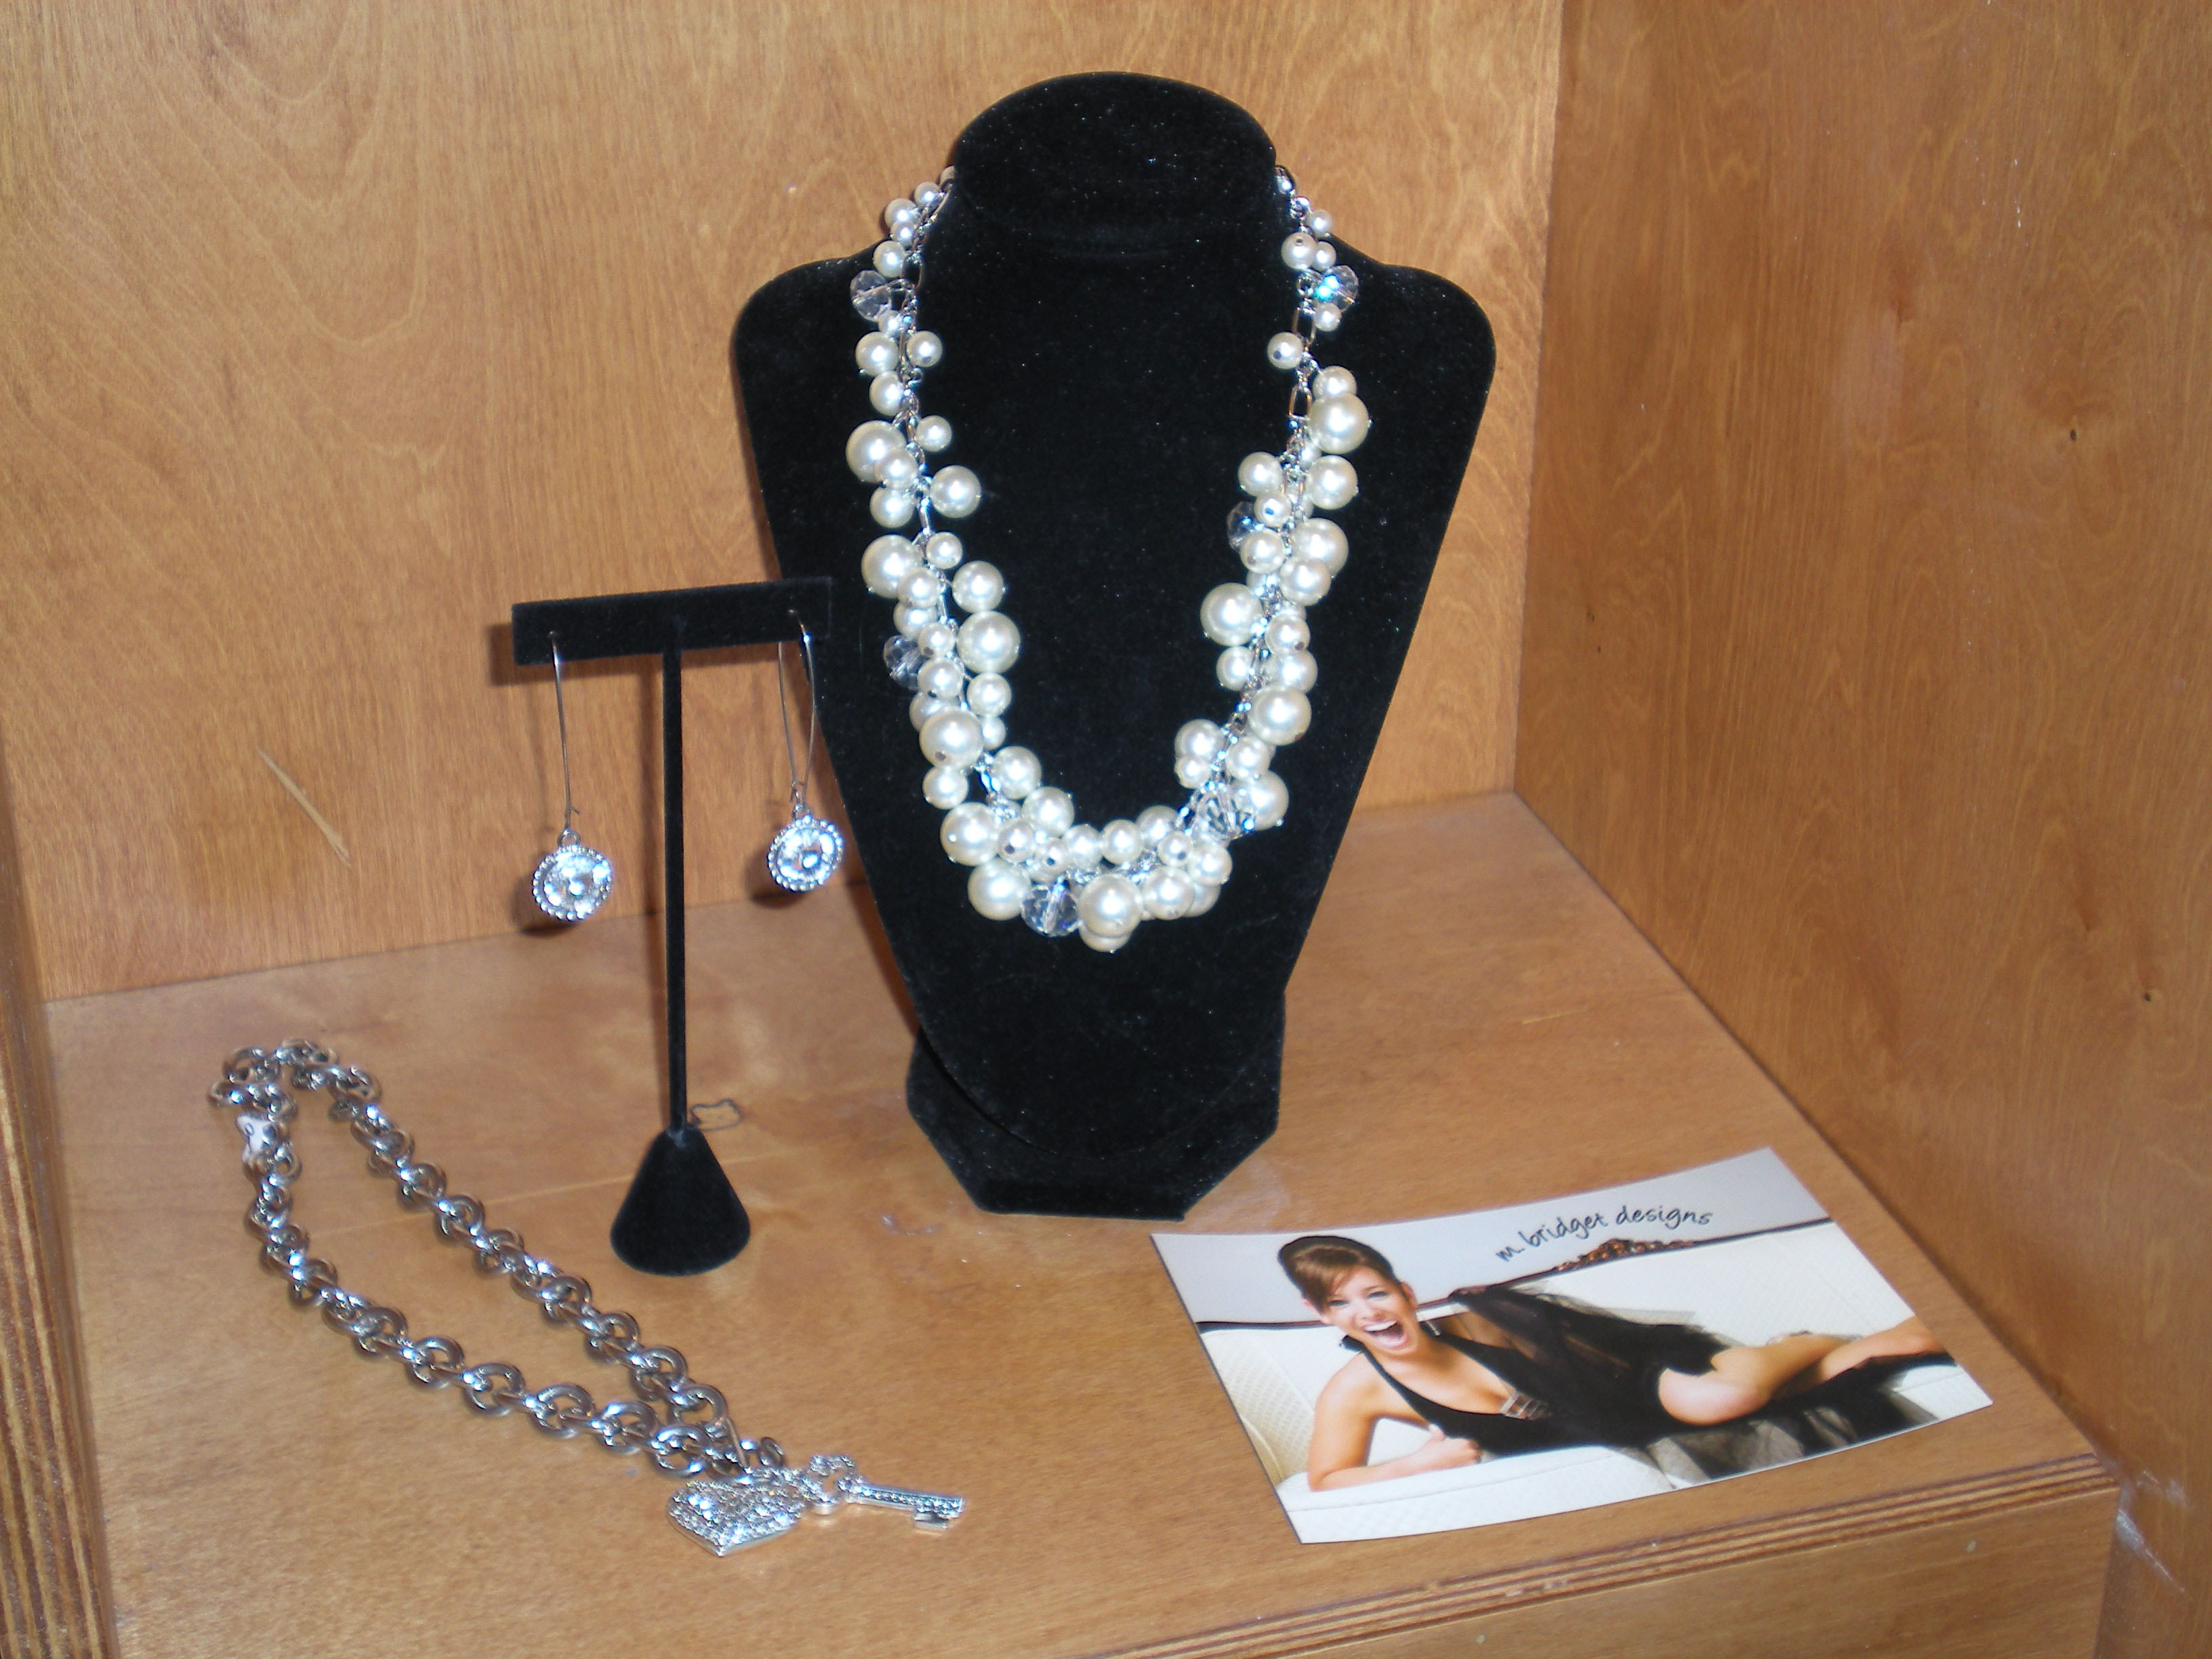 Jewelry and accessories at Drama